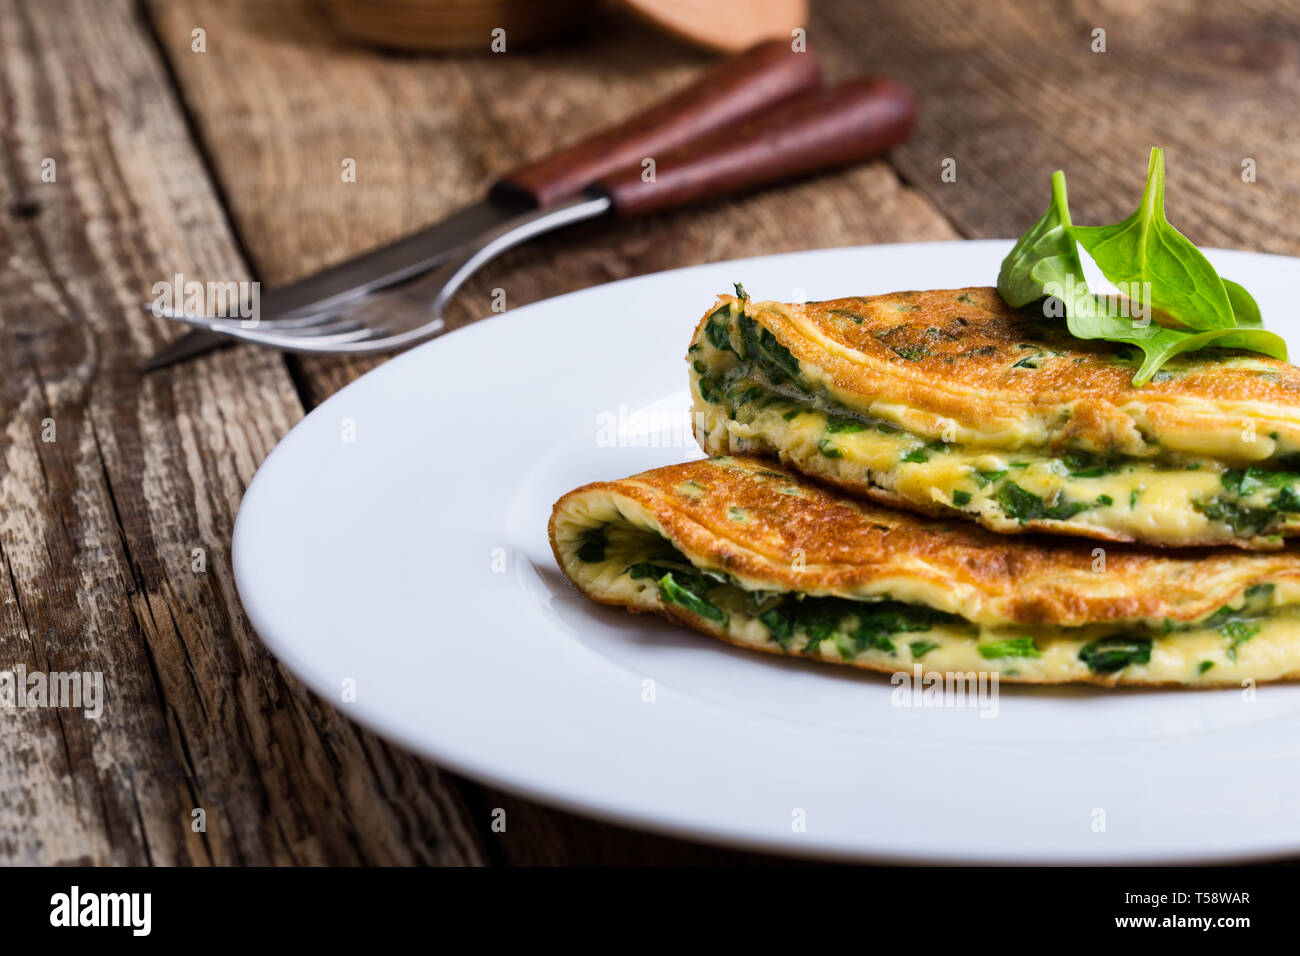 Baby spinach and parmesan cheese omelette, healthy vegetarian breakfast or brunch on wooden rustic table, close up, selective focus Stock Photo